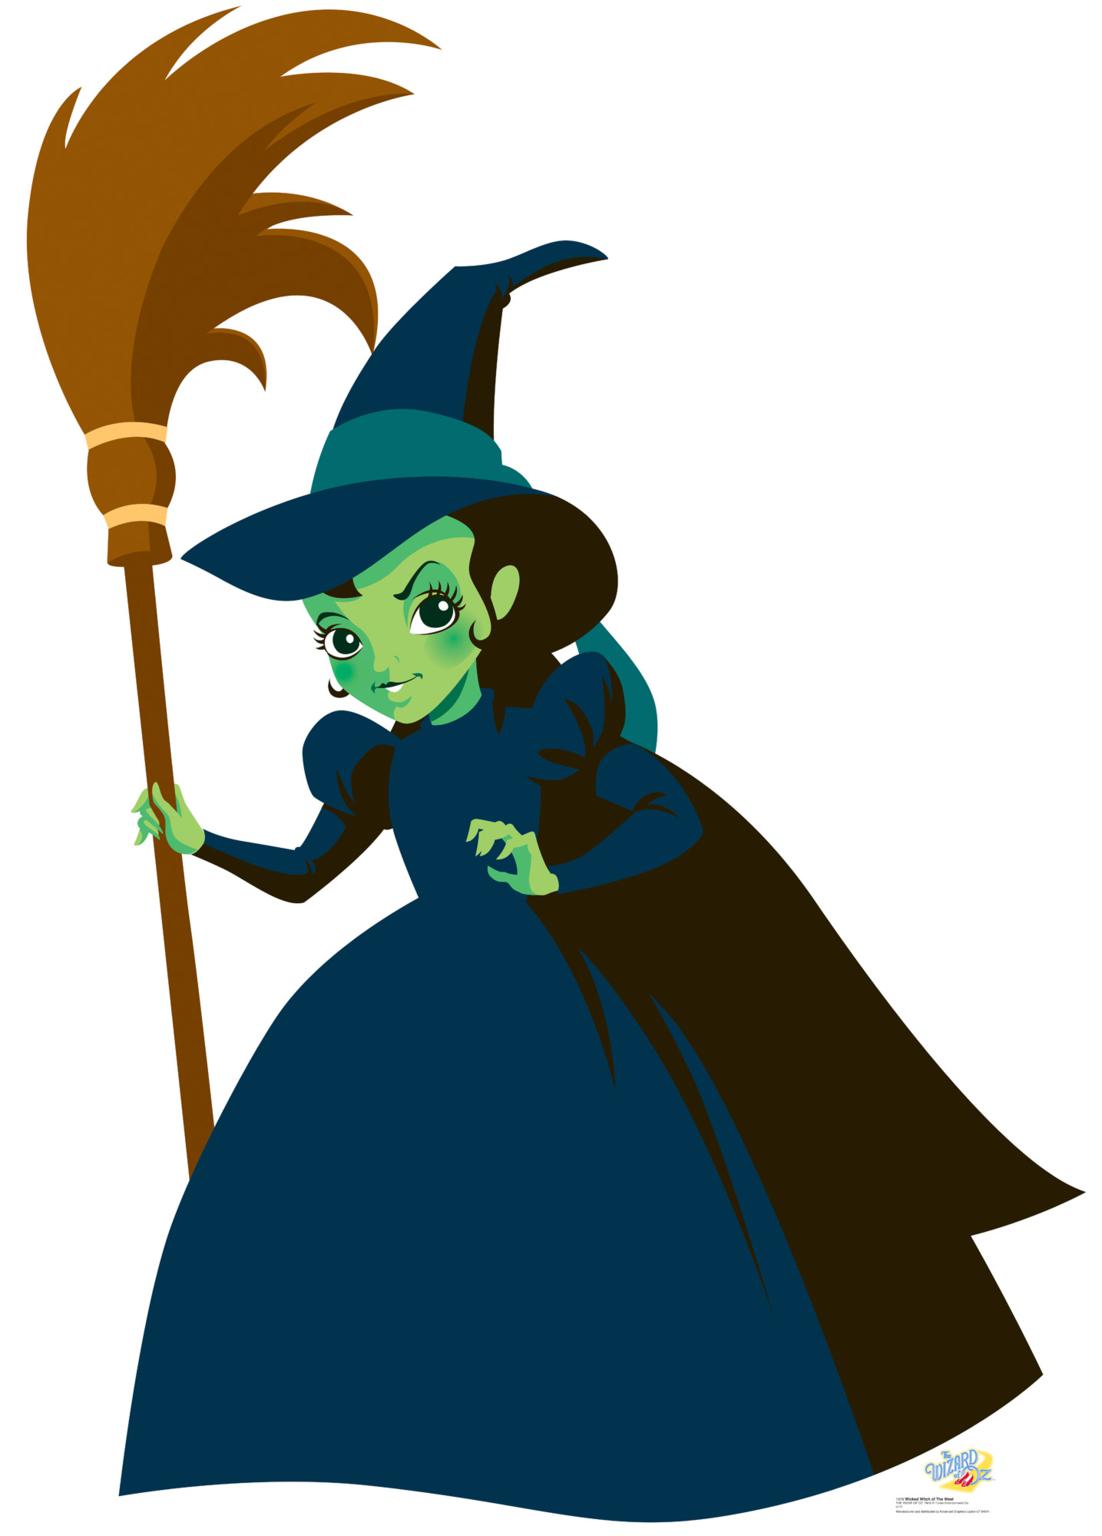 Wizard Of Oz Clipart - 51 cliparts